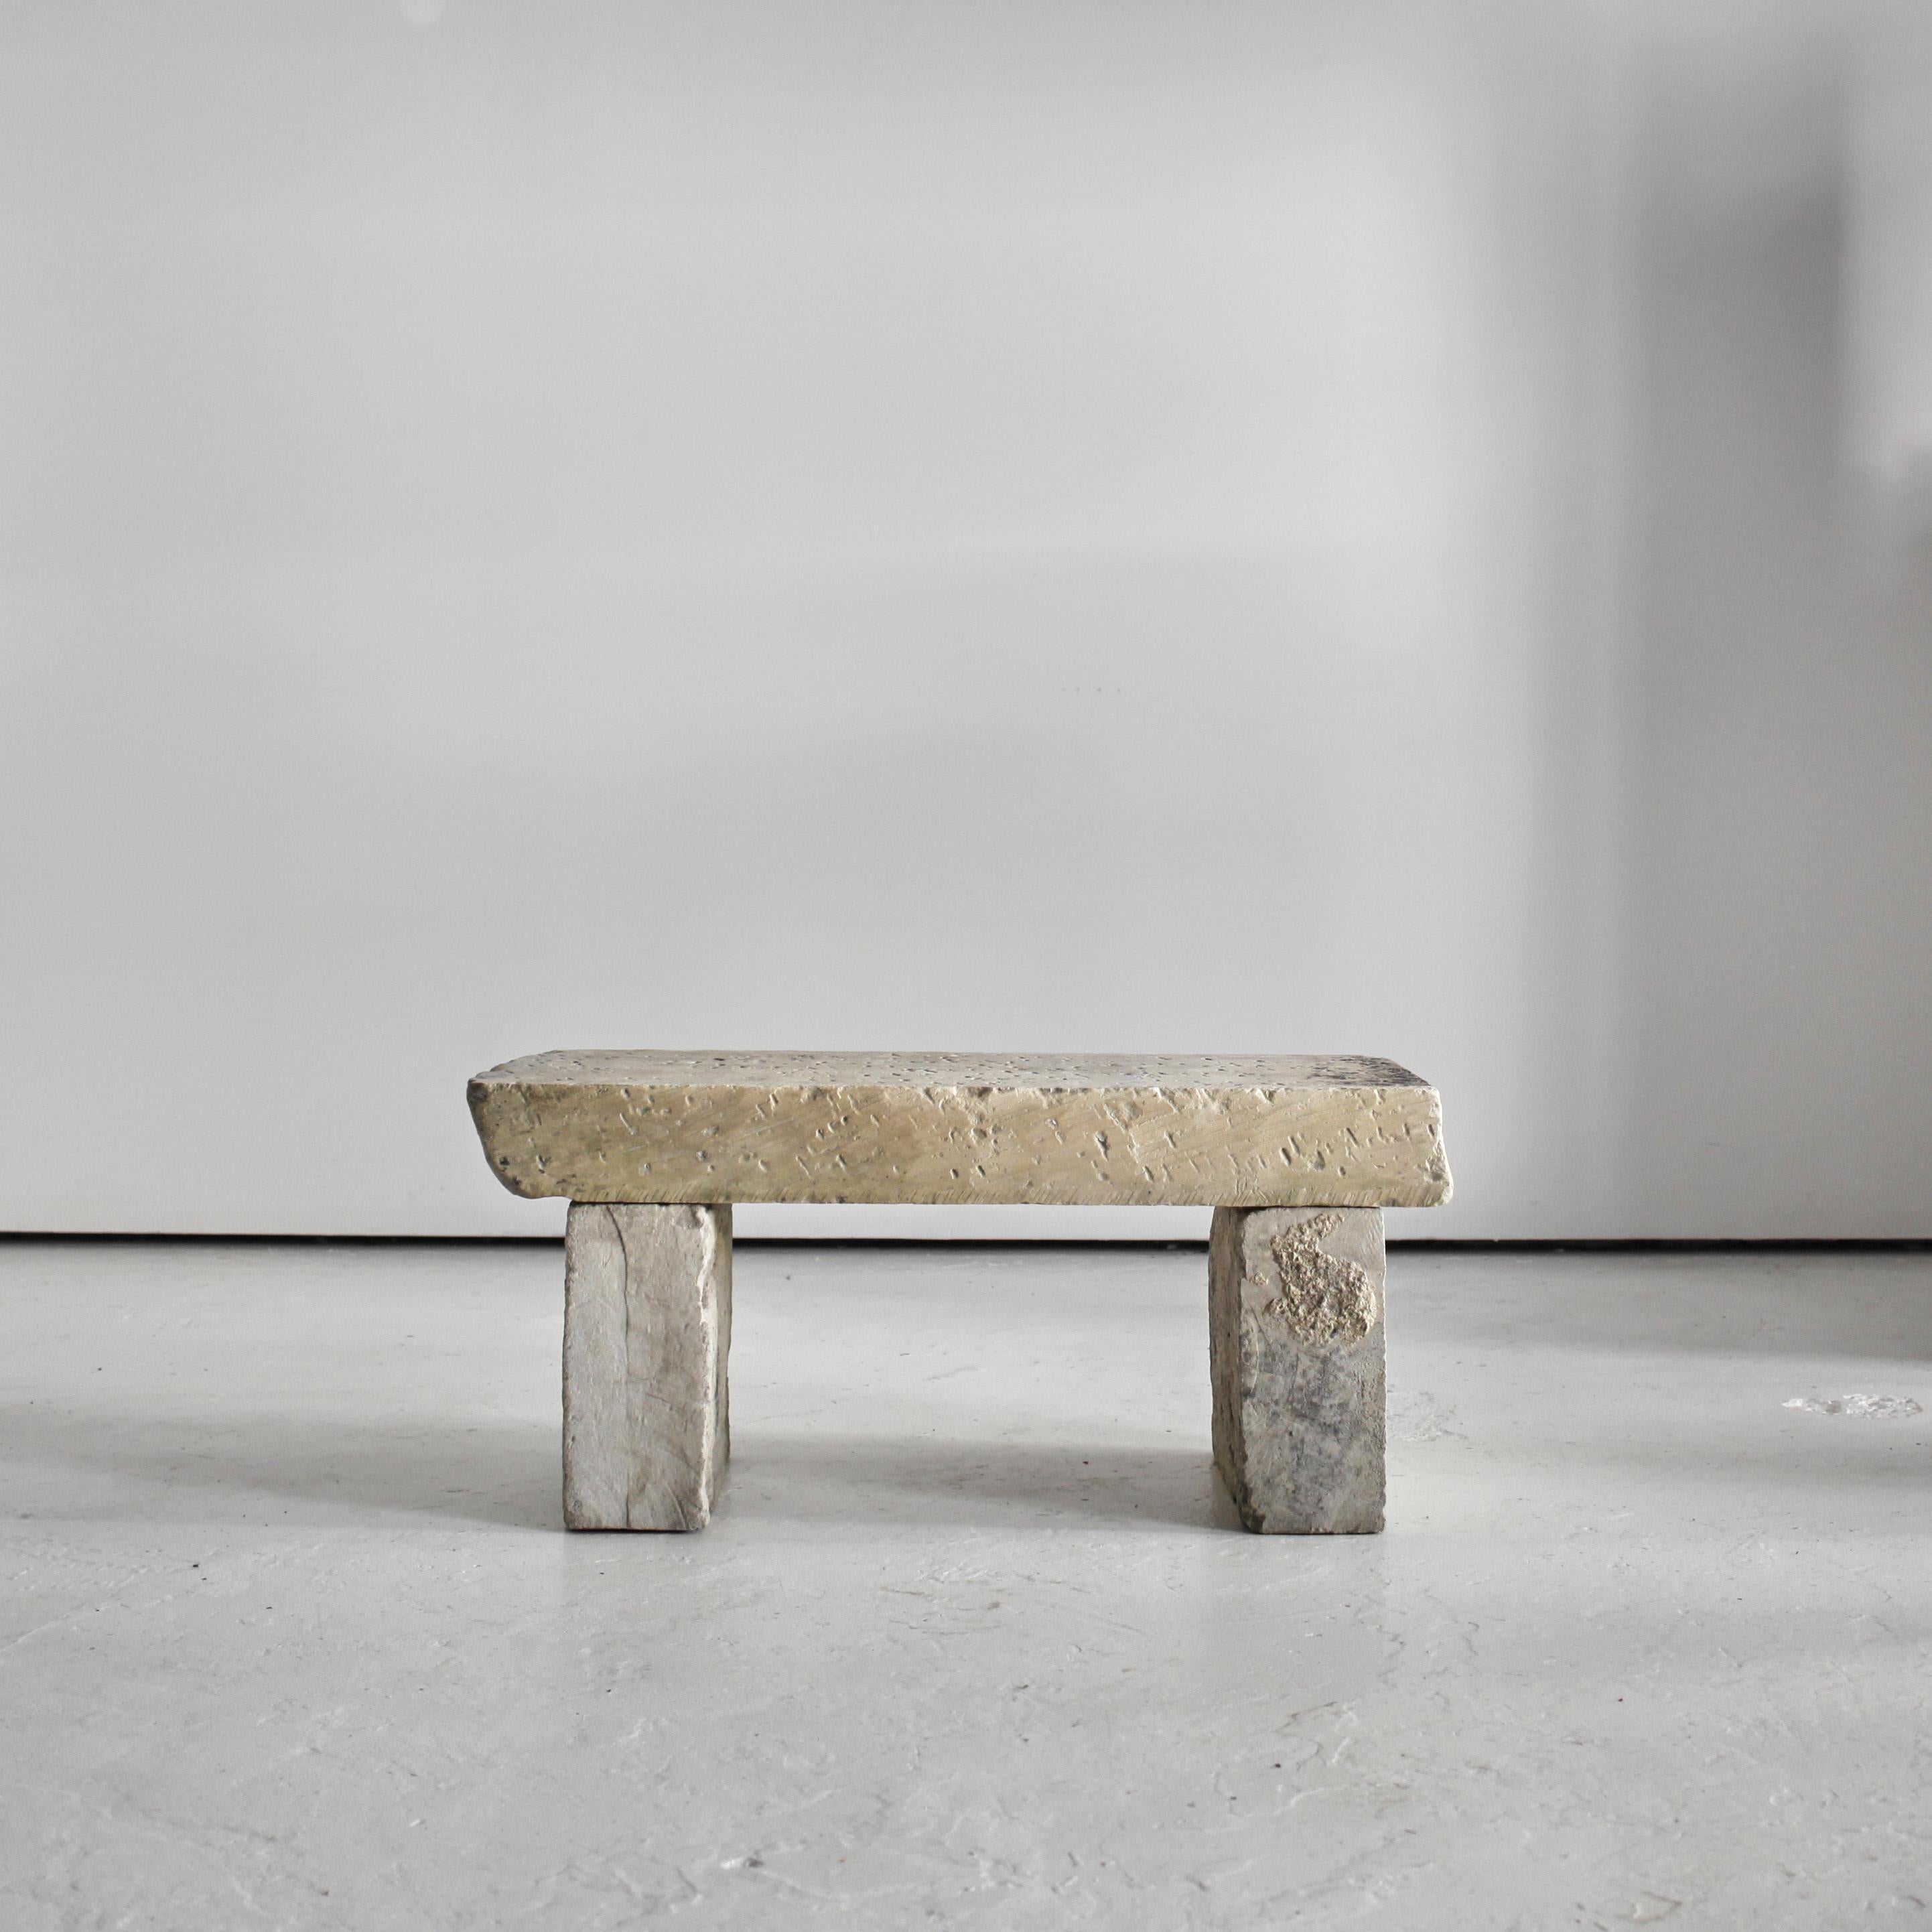 A French primitively carved “tuffeau” stone bench from the Loire valley.

Constructed simply from three thick slabs of local Loire stone.